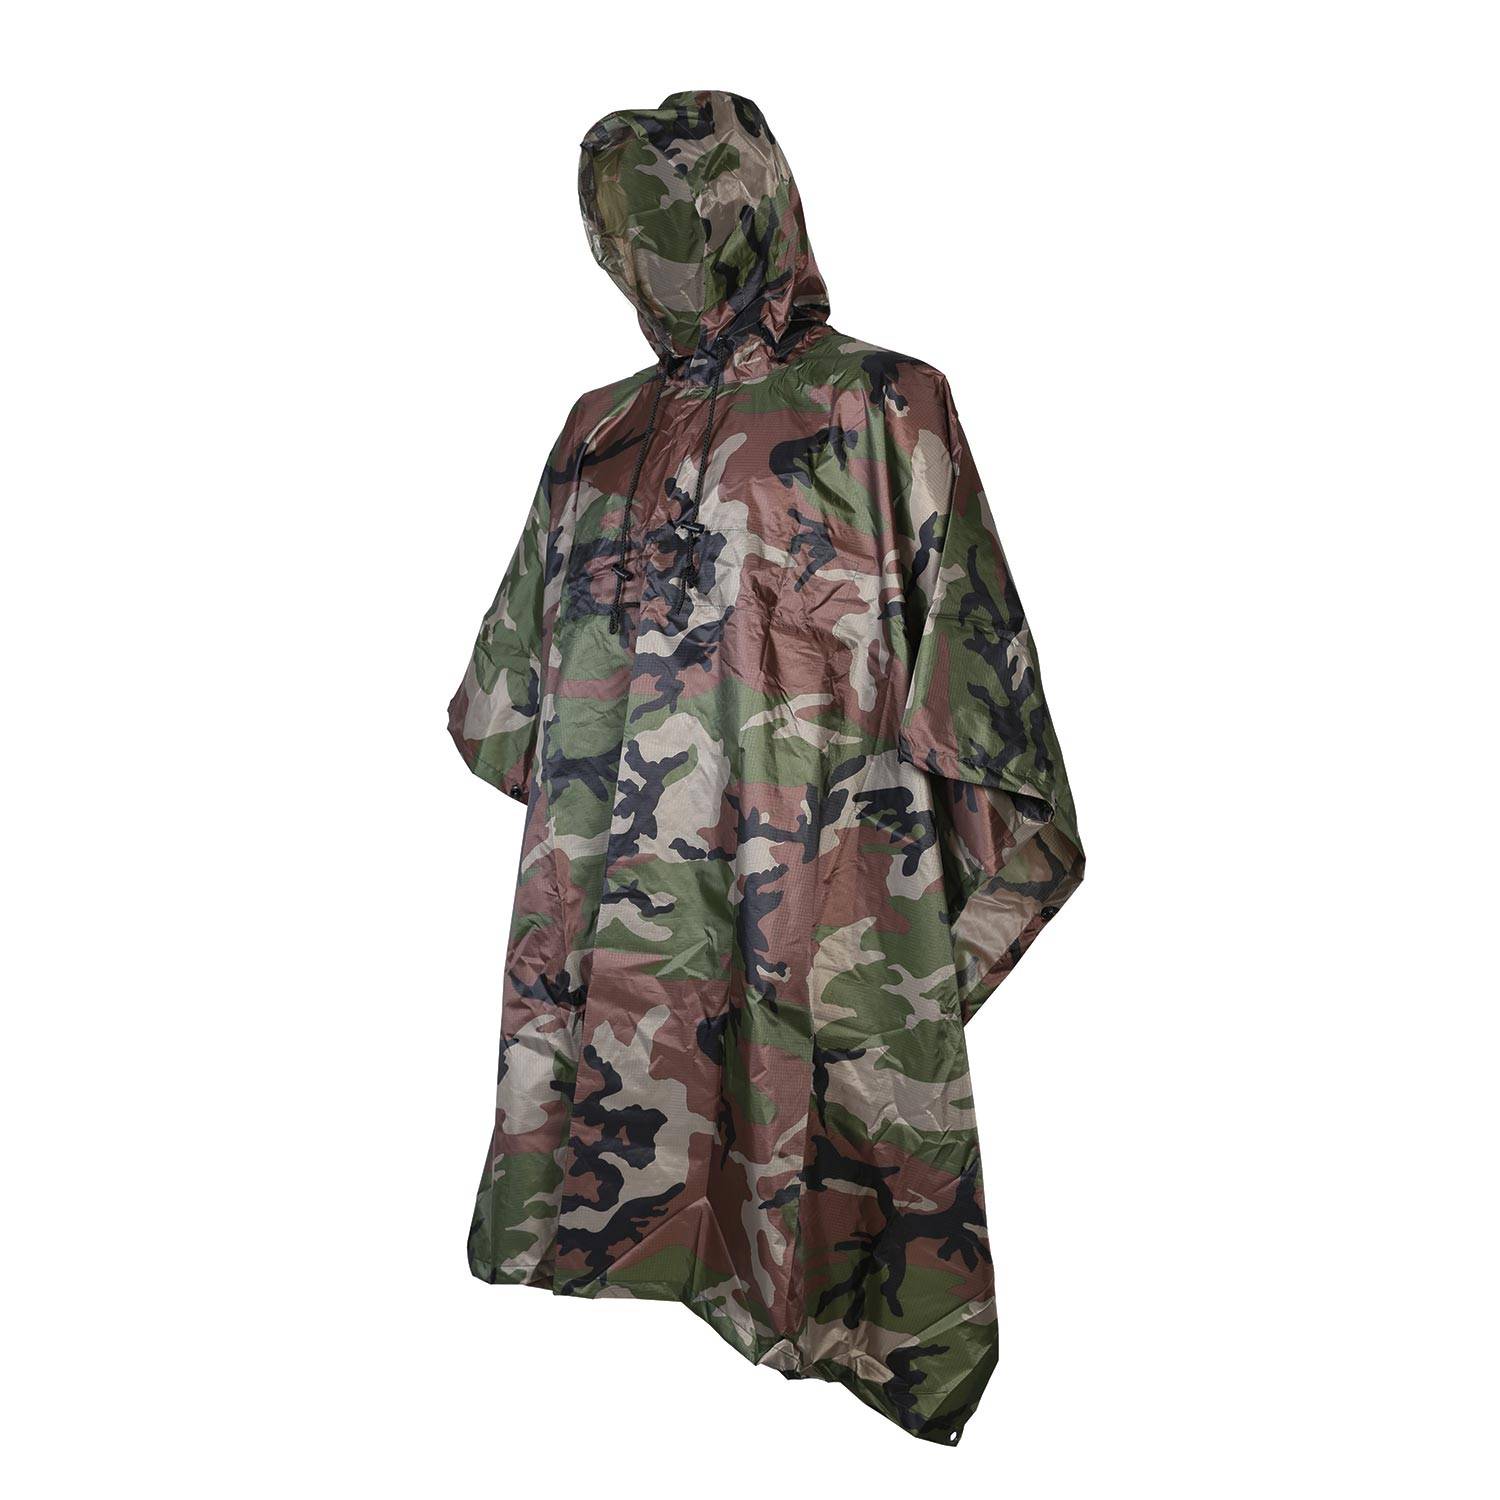 5IVE STAR GEAR MILITARY PONCHO